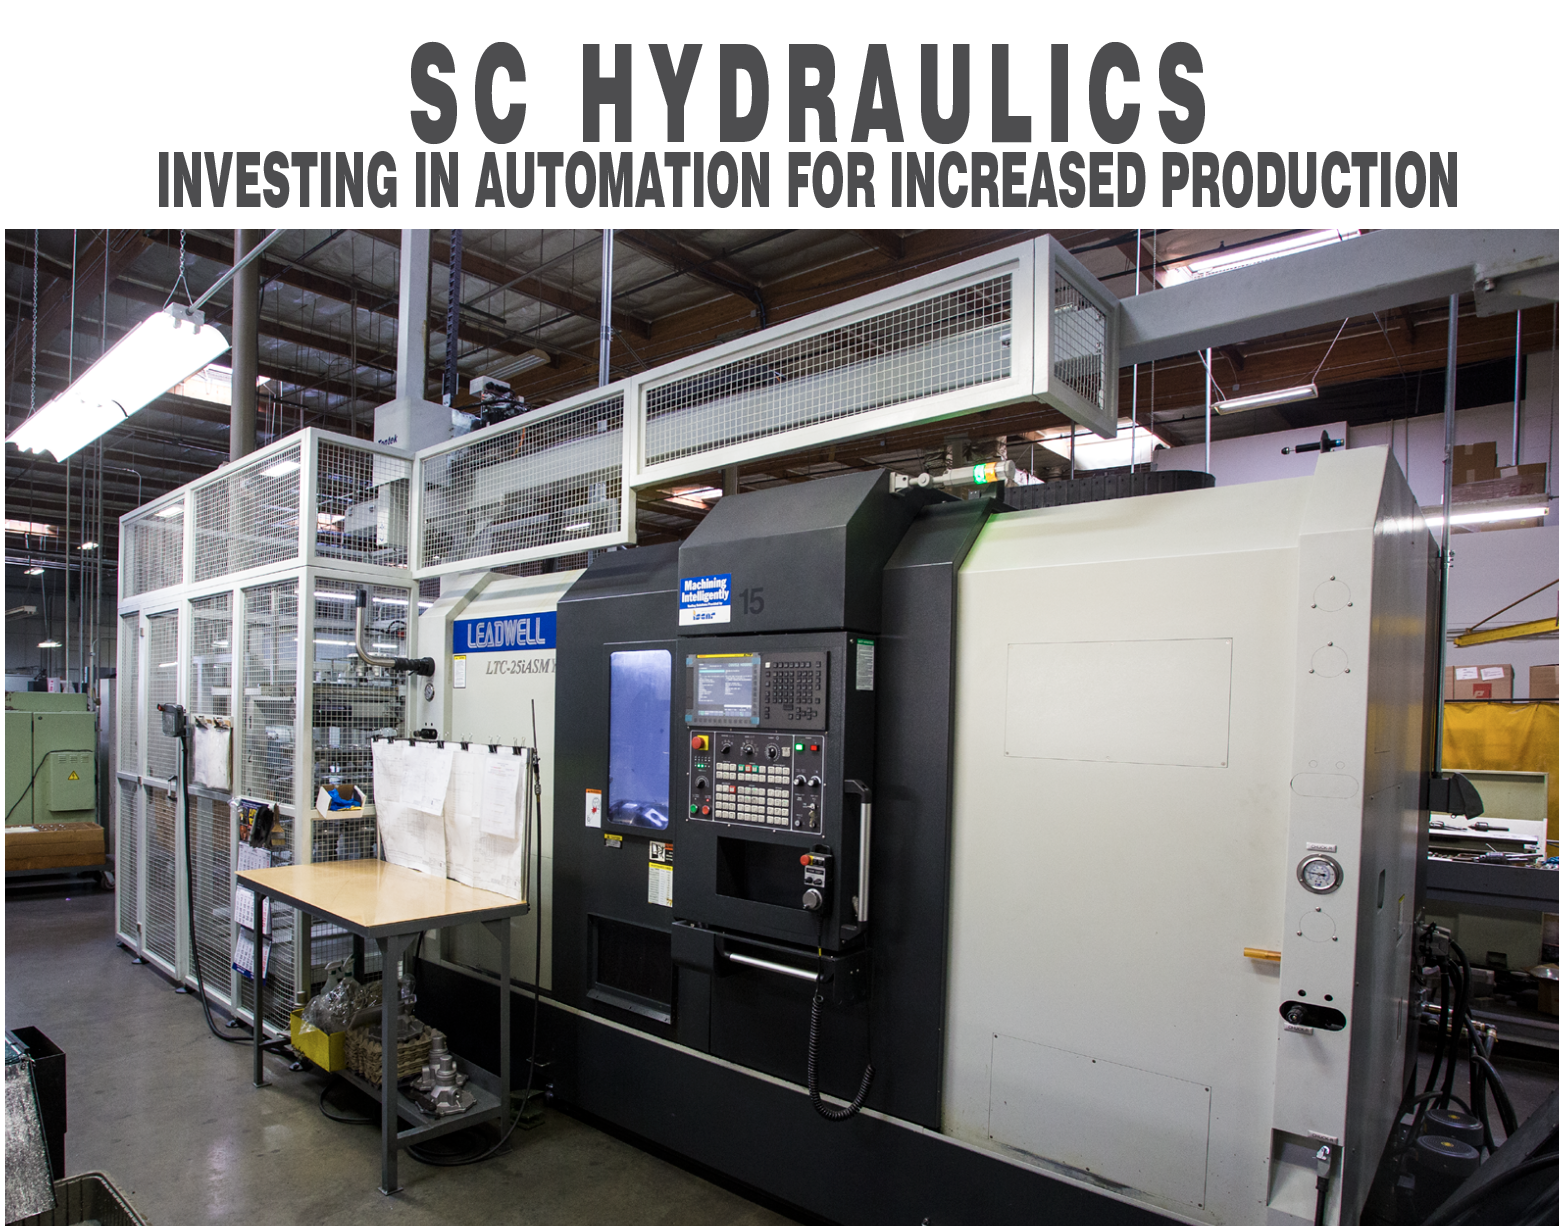 SC Hydraulics – Investing In Automation For Increased Production